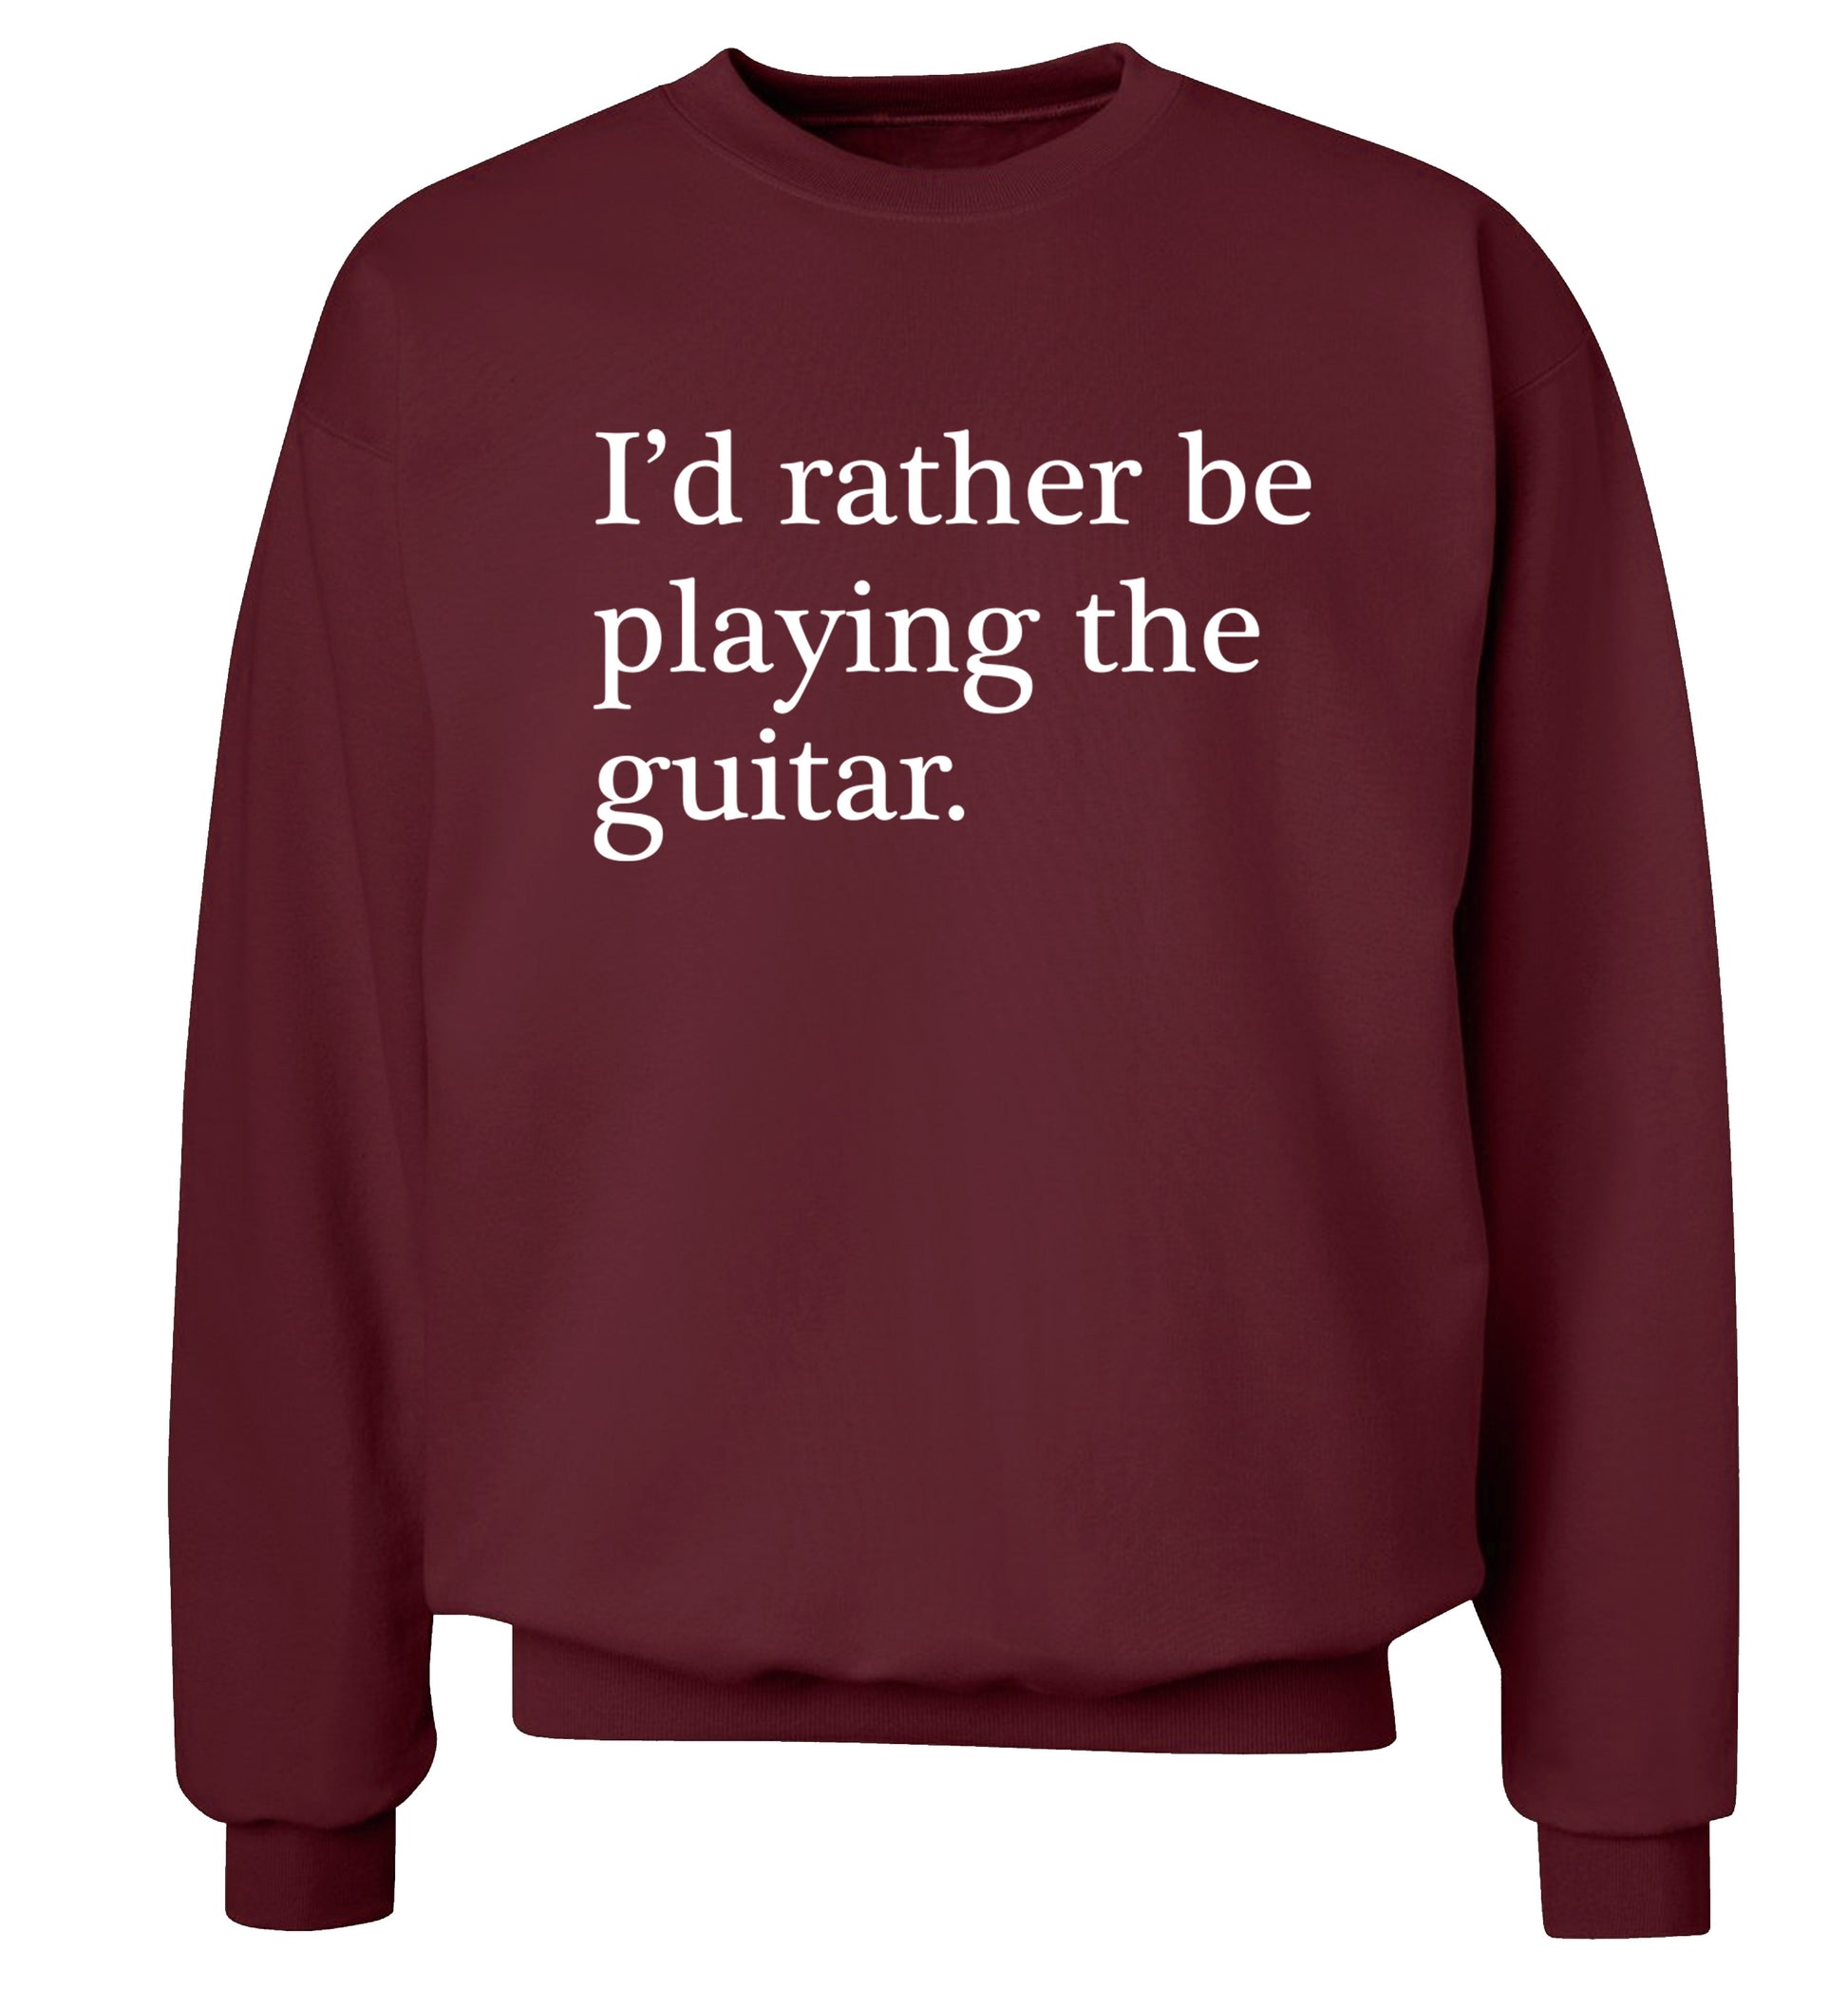 I'd rather be playing the guitar Adult's unisex maroon Sweater 2XL